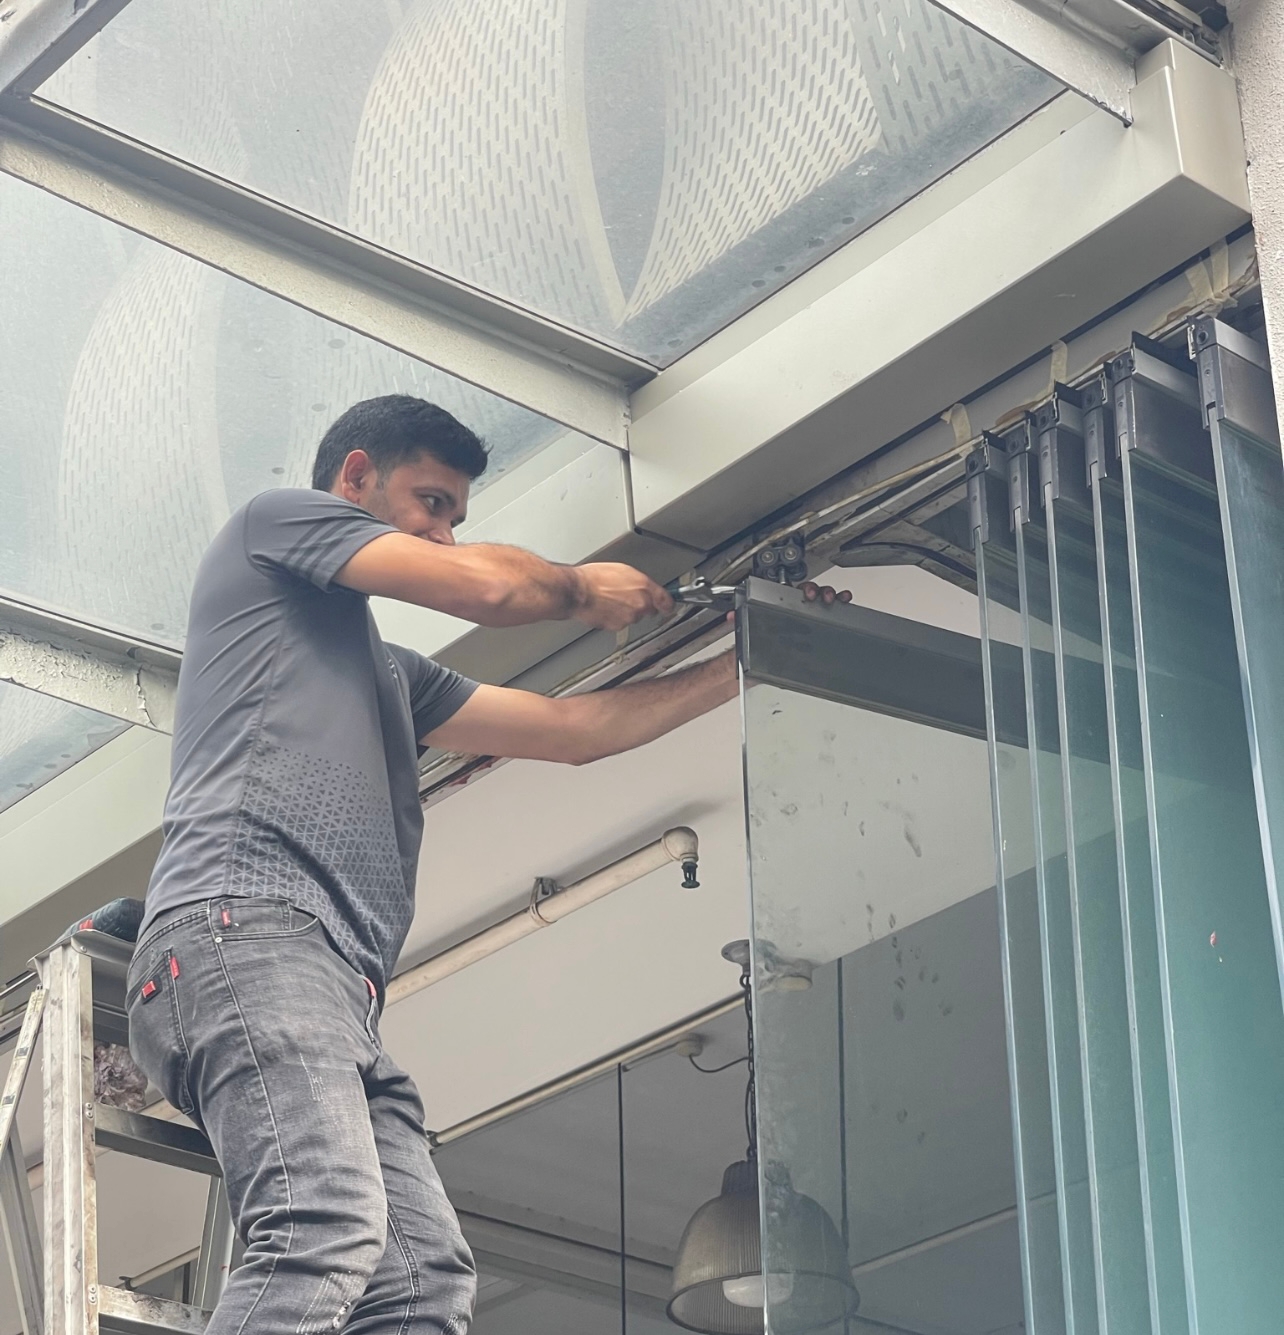 Get Your Glide Back: Sliding Door Roller Replacement in Singapore